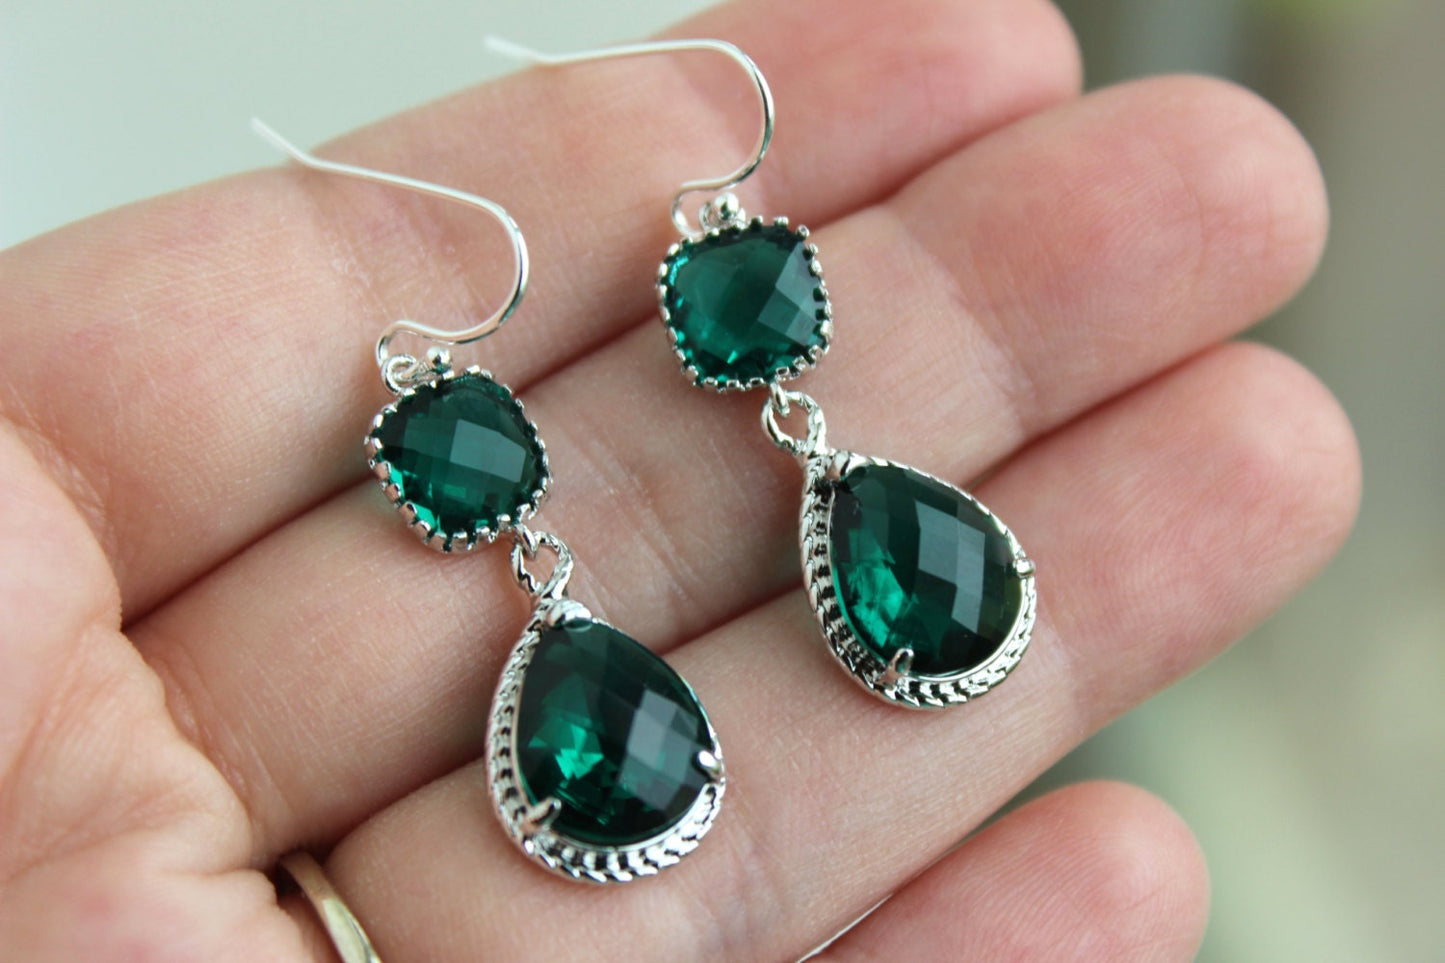 Silver Emerald Green Earrings Two Tiered Glass Earrings Jade Bridesmaid Earrings Emerald Wedding Earrings Wedding Jewelry Bridesmaid